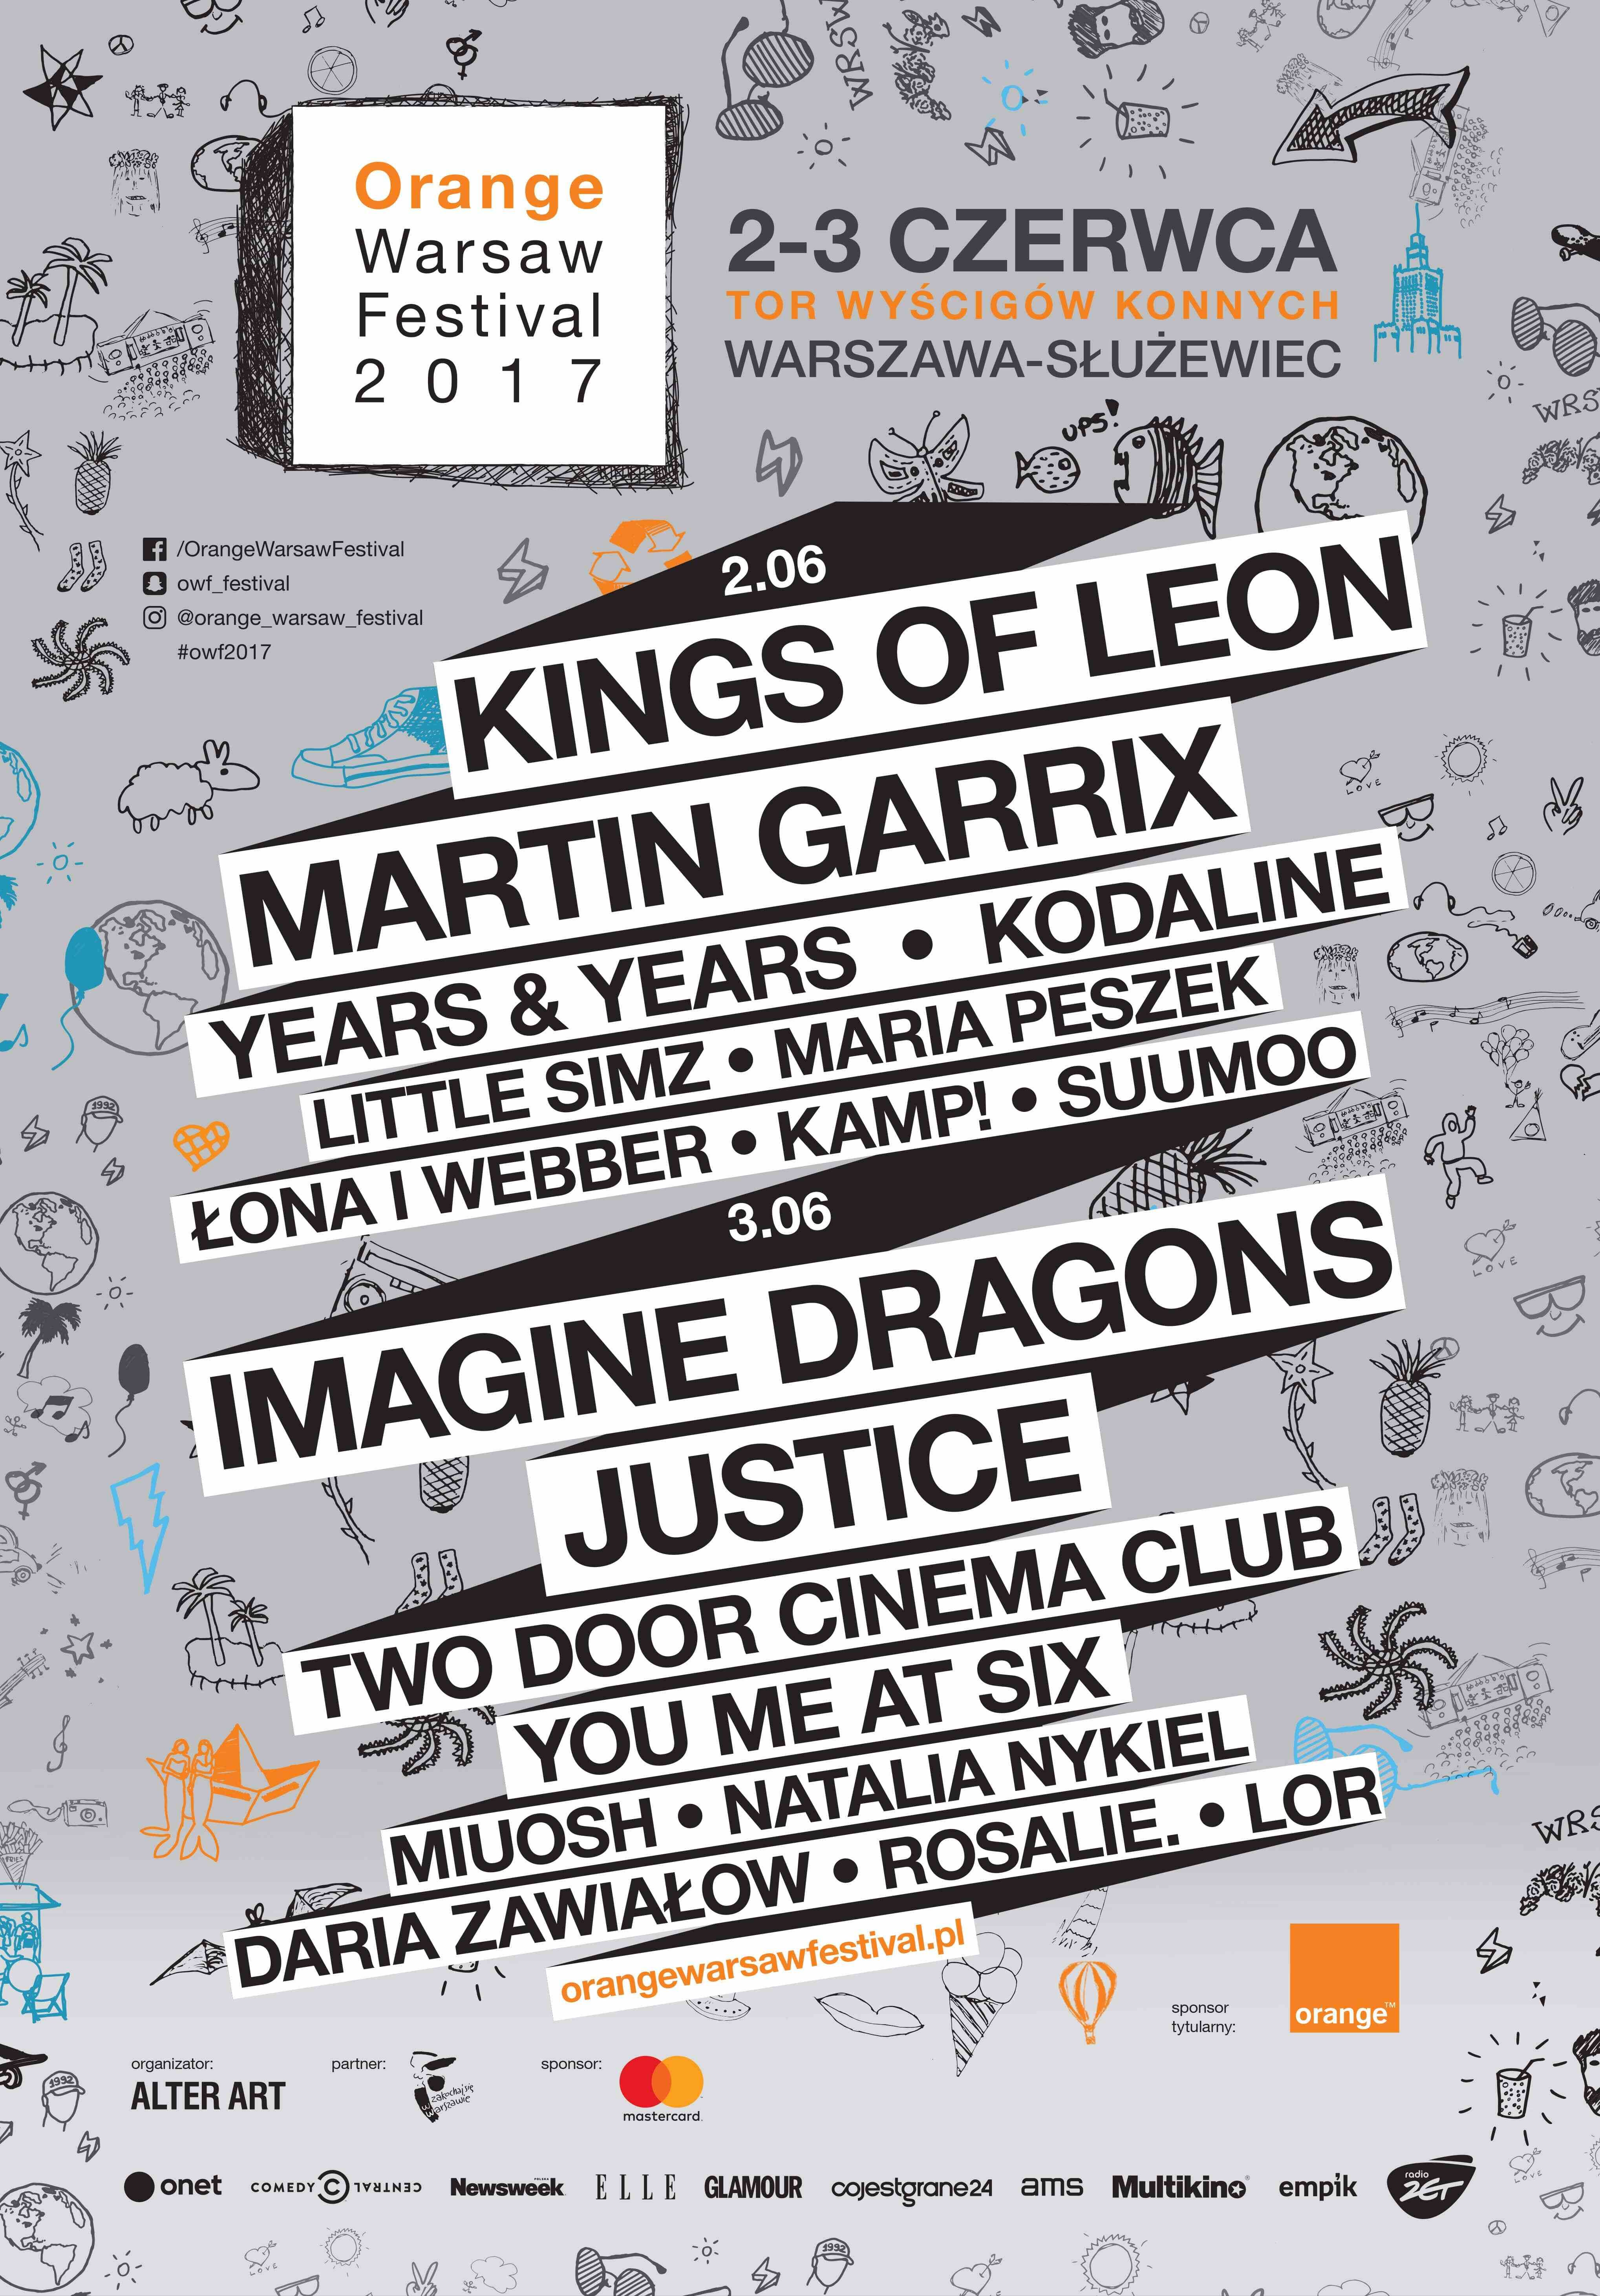 2017 line-up: Kings of Leon, Imagine Dragons, Martin Garrix, Justice, Years and Years, Kopaline and more